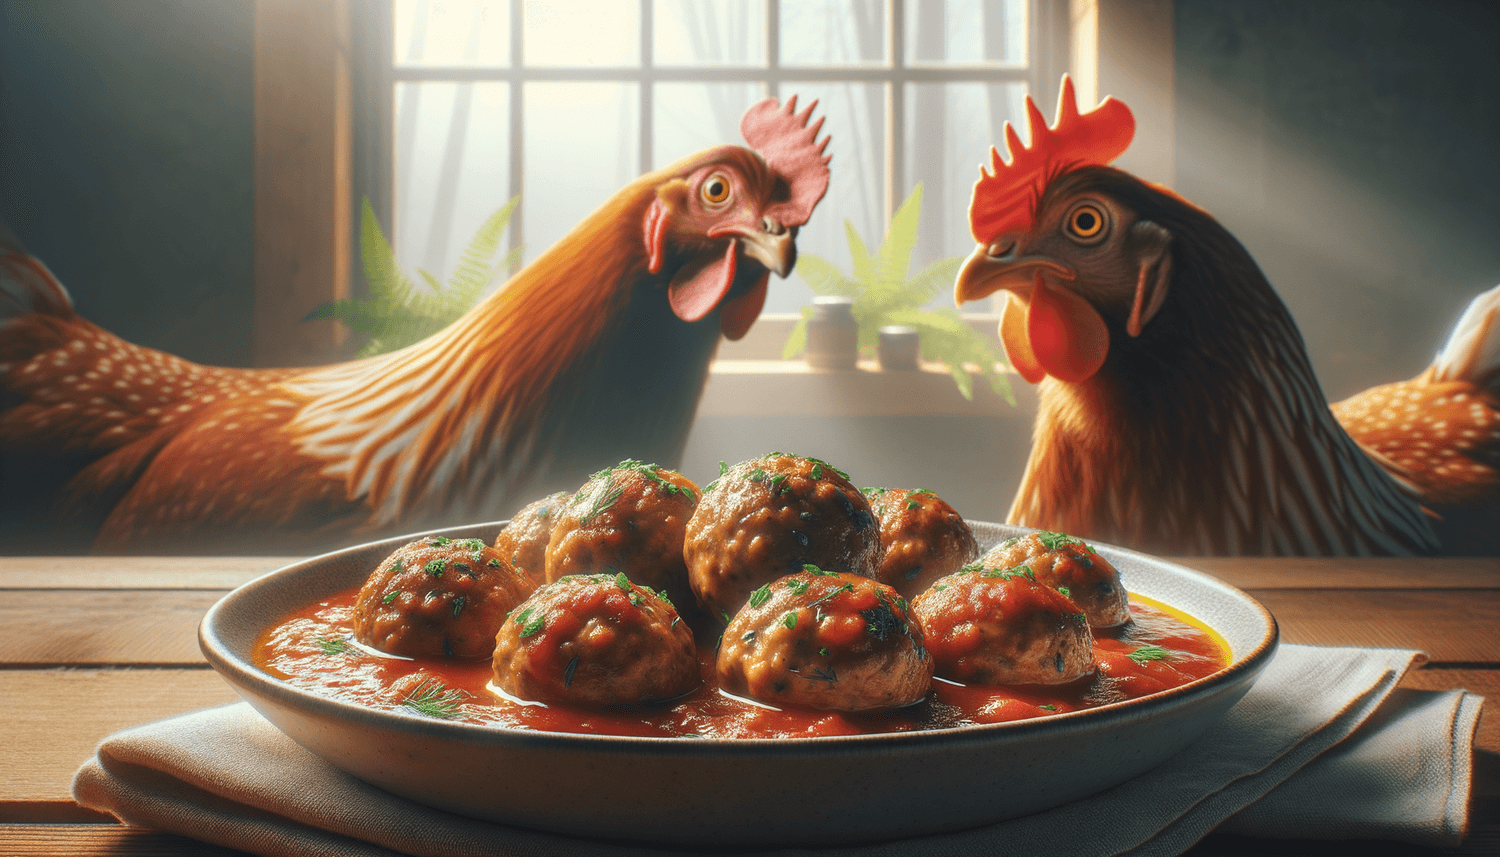 Can Chickens Eat Meatballs?